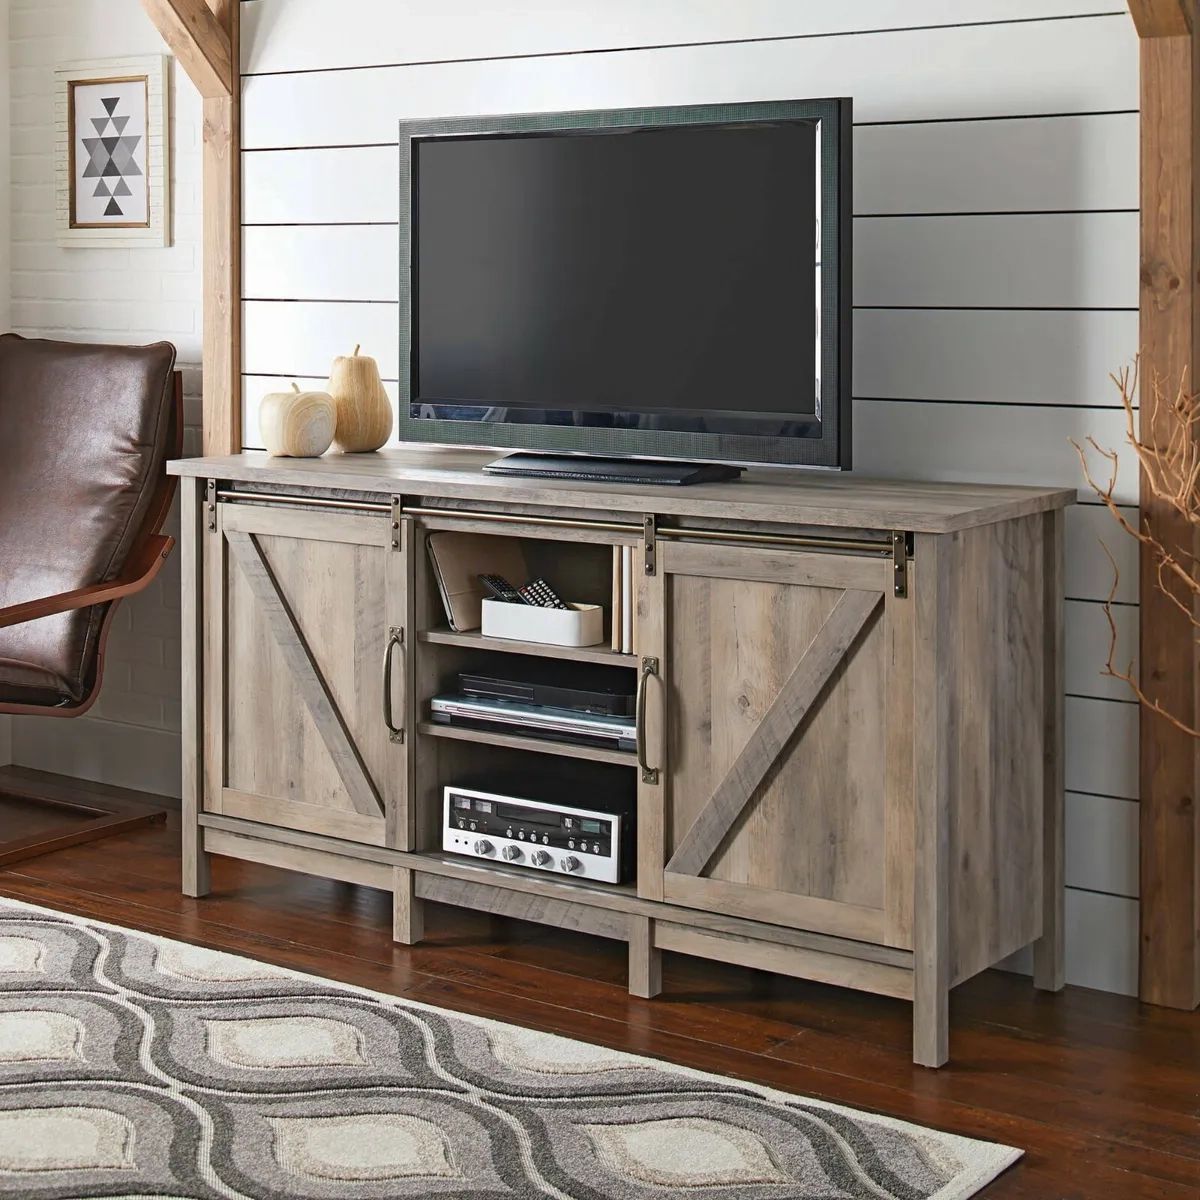 Better Homes And Gardens Modern Farmhouse Tv Stand For Tvs Up To 70",  Rustic Gra | Ebay In Farmhouse Stands For Tvs (View 7 of 15)